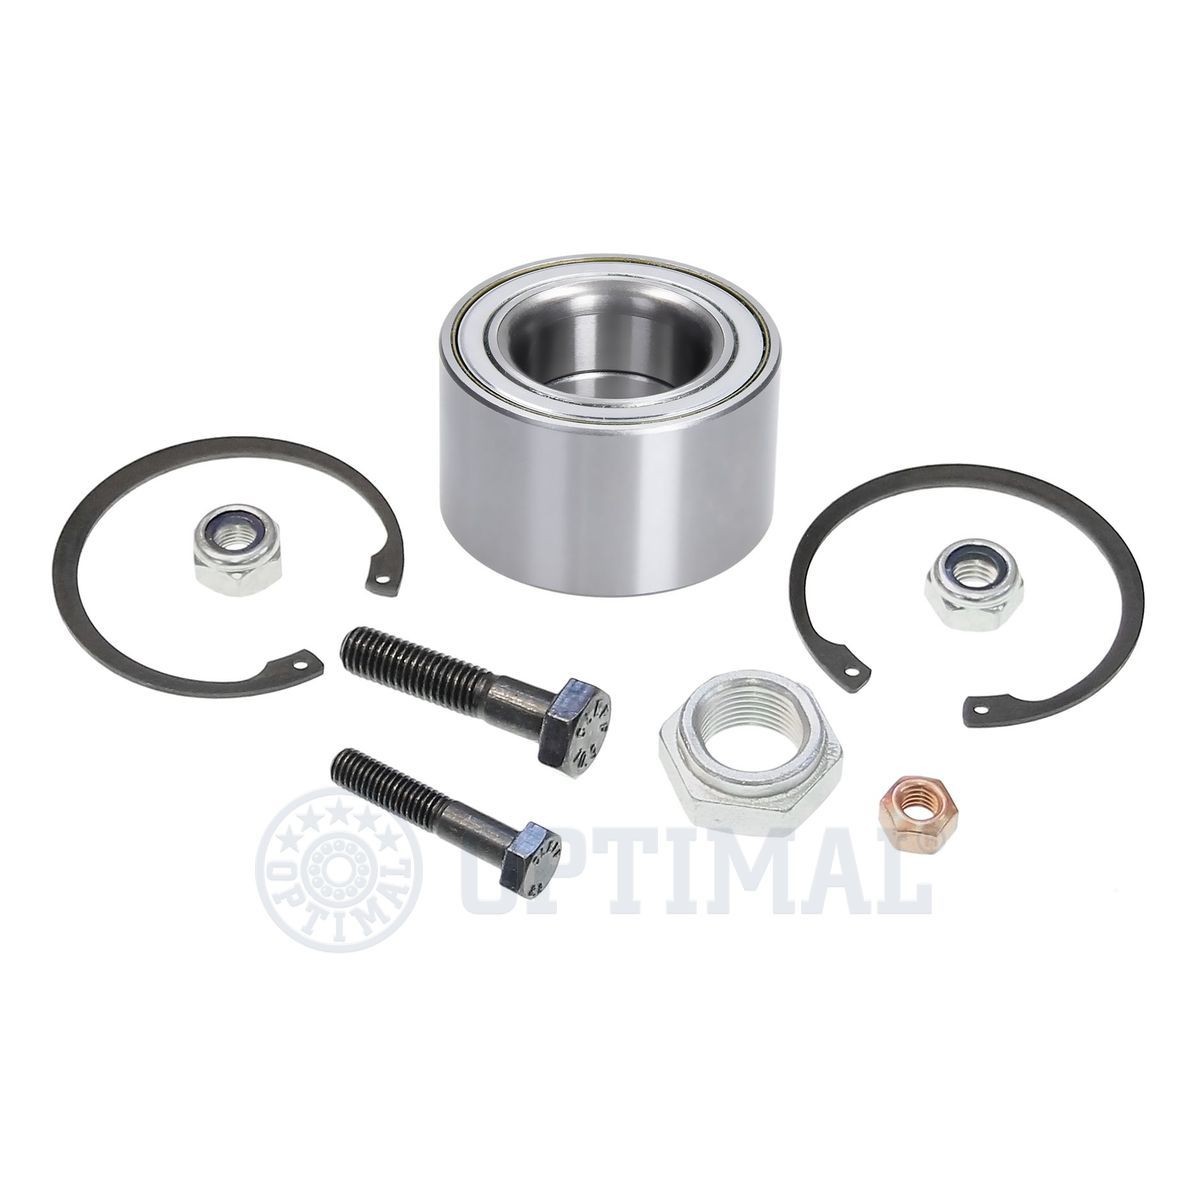 OPTIMAL 101010 Wheel bearing kit with accessories, , 64 mm